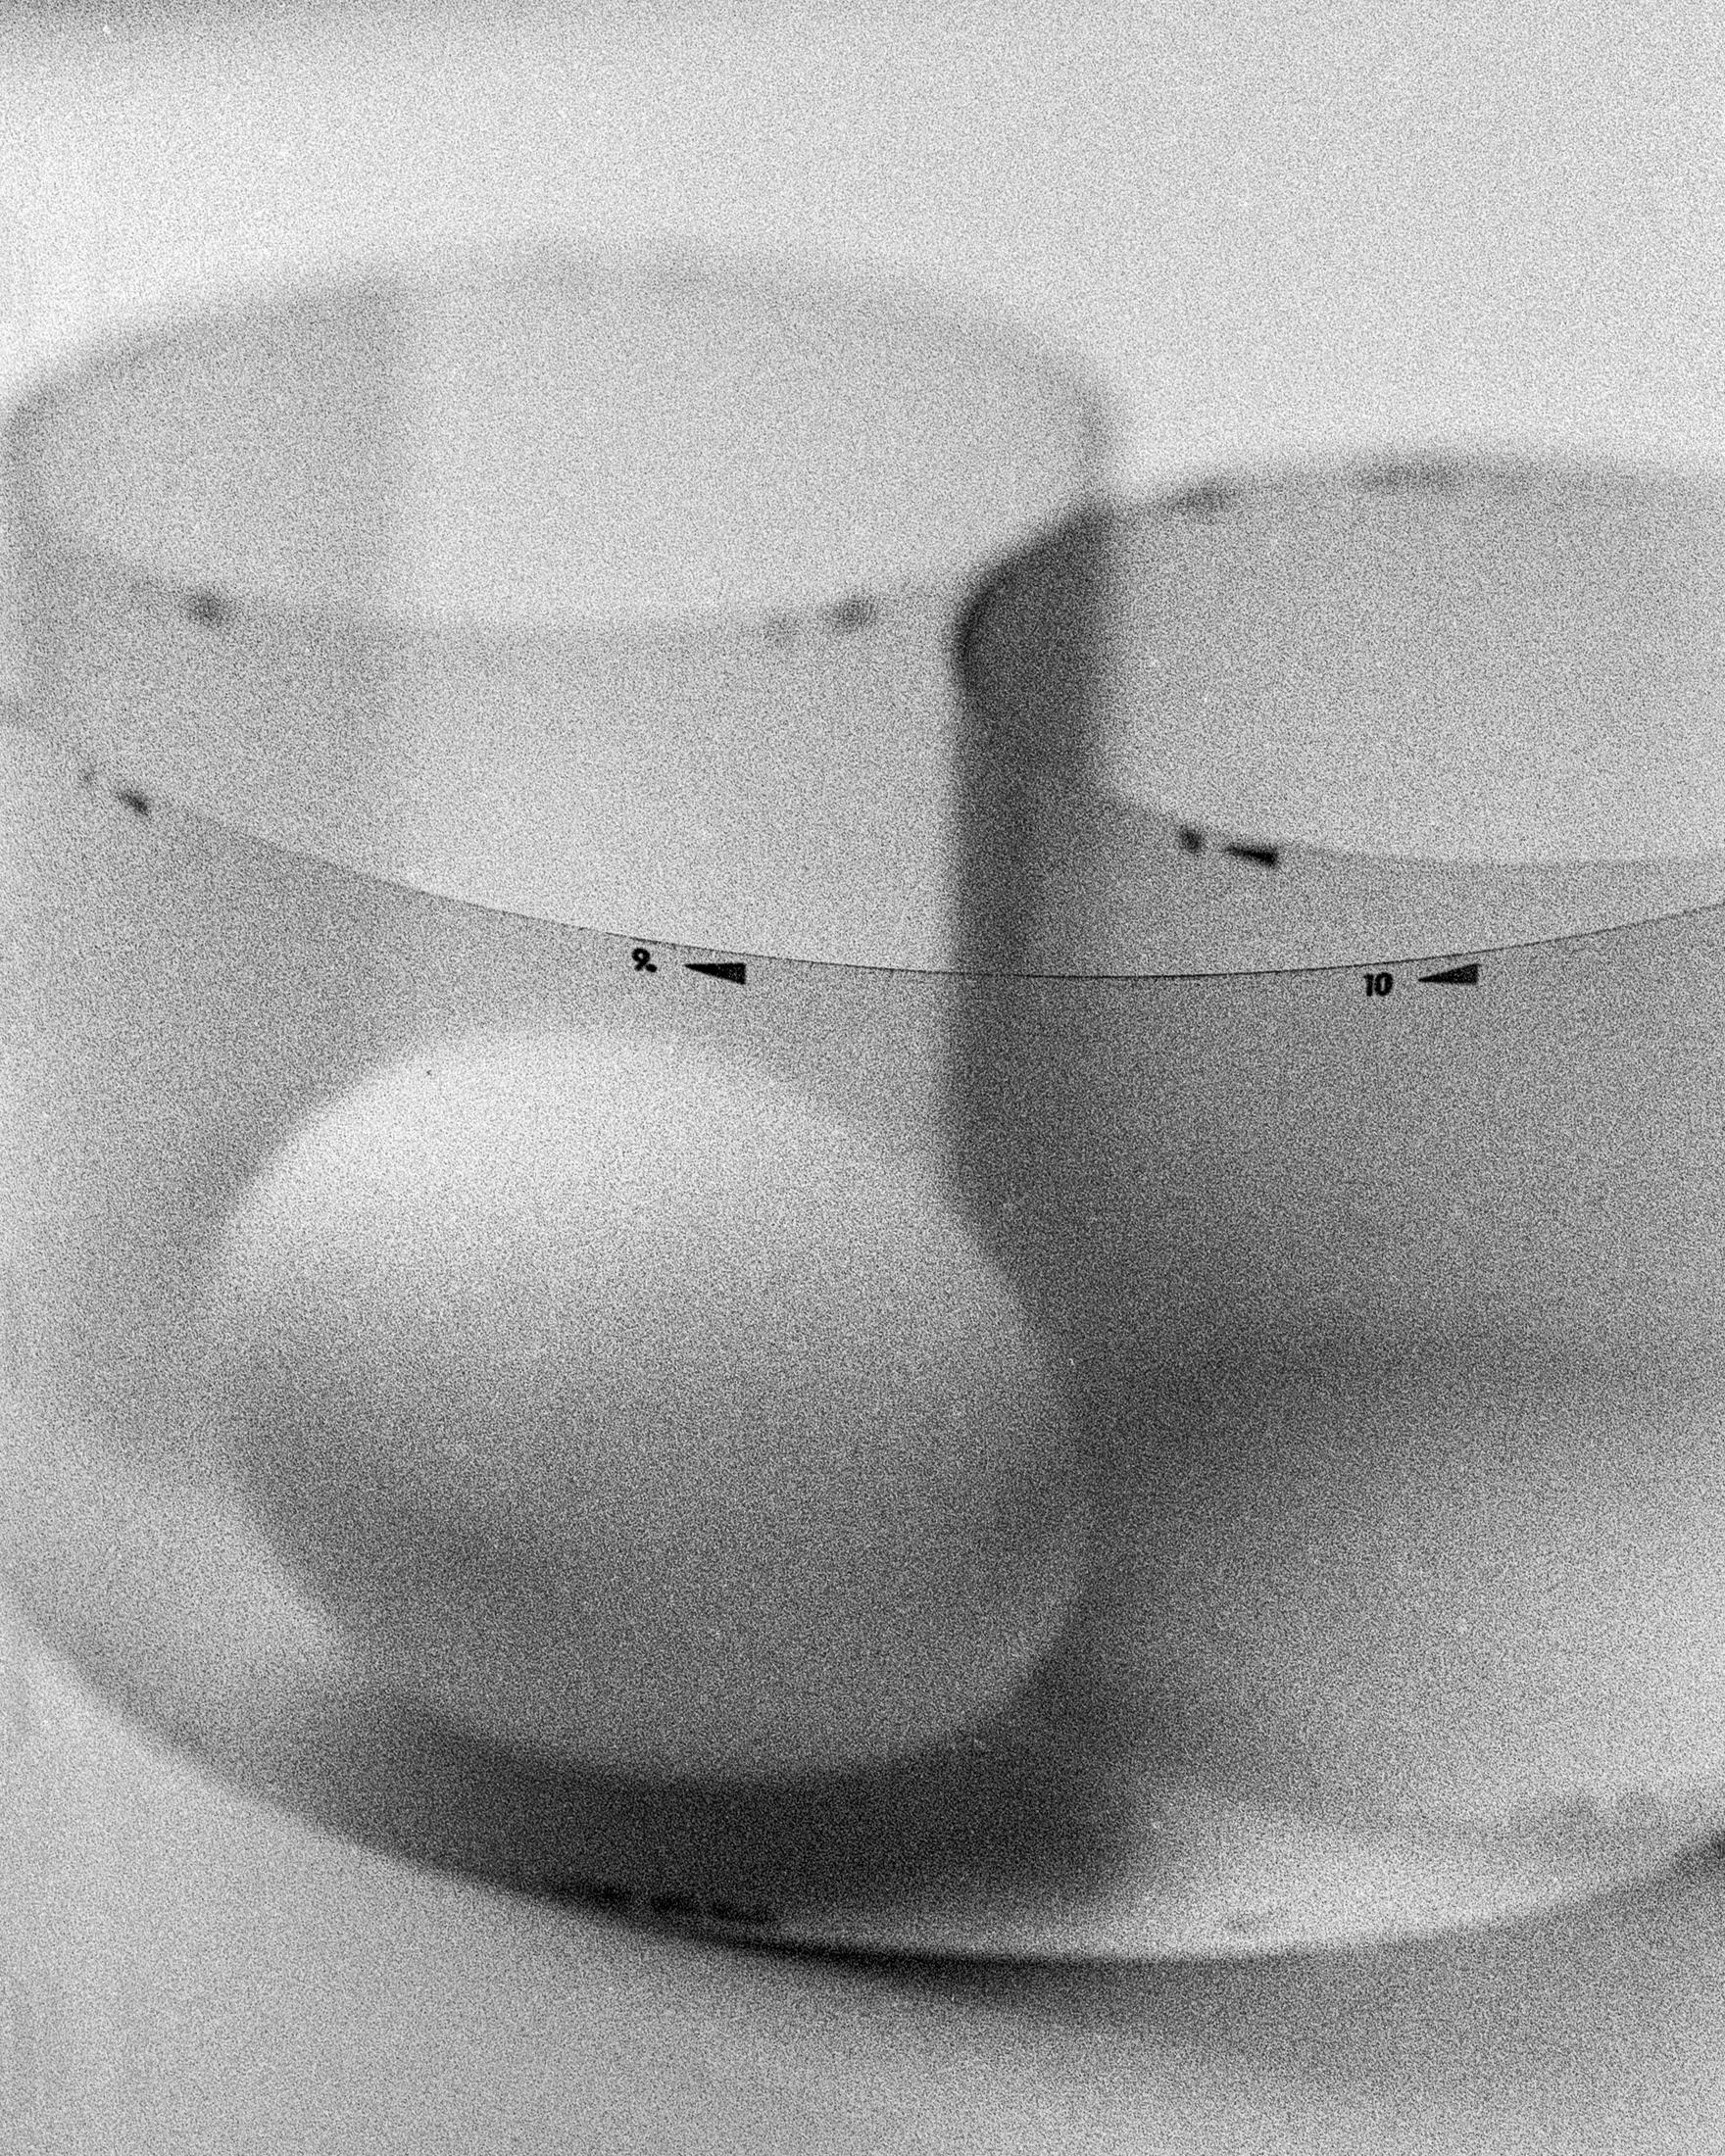 Shine Huang Abstract Photograph - Egg Study 7. Still Life . Black and White Silver Gelatin Print